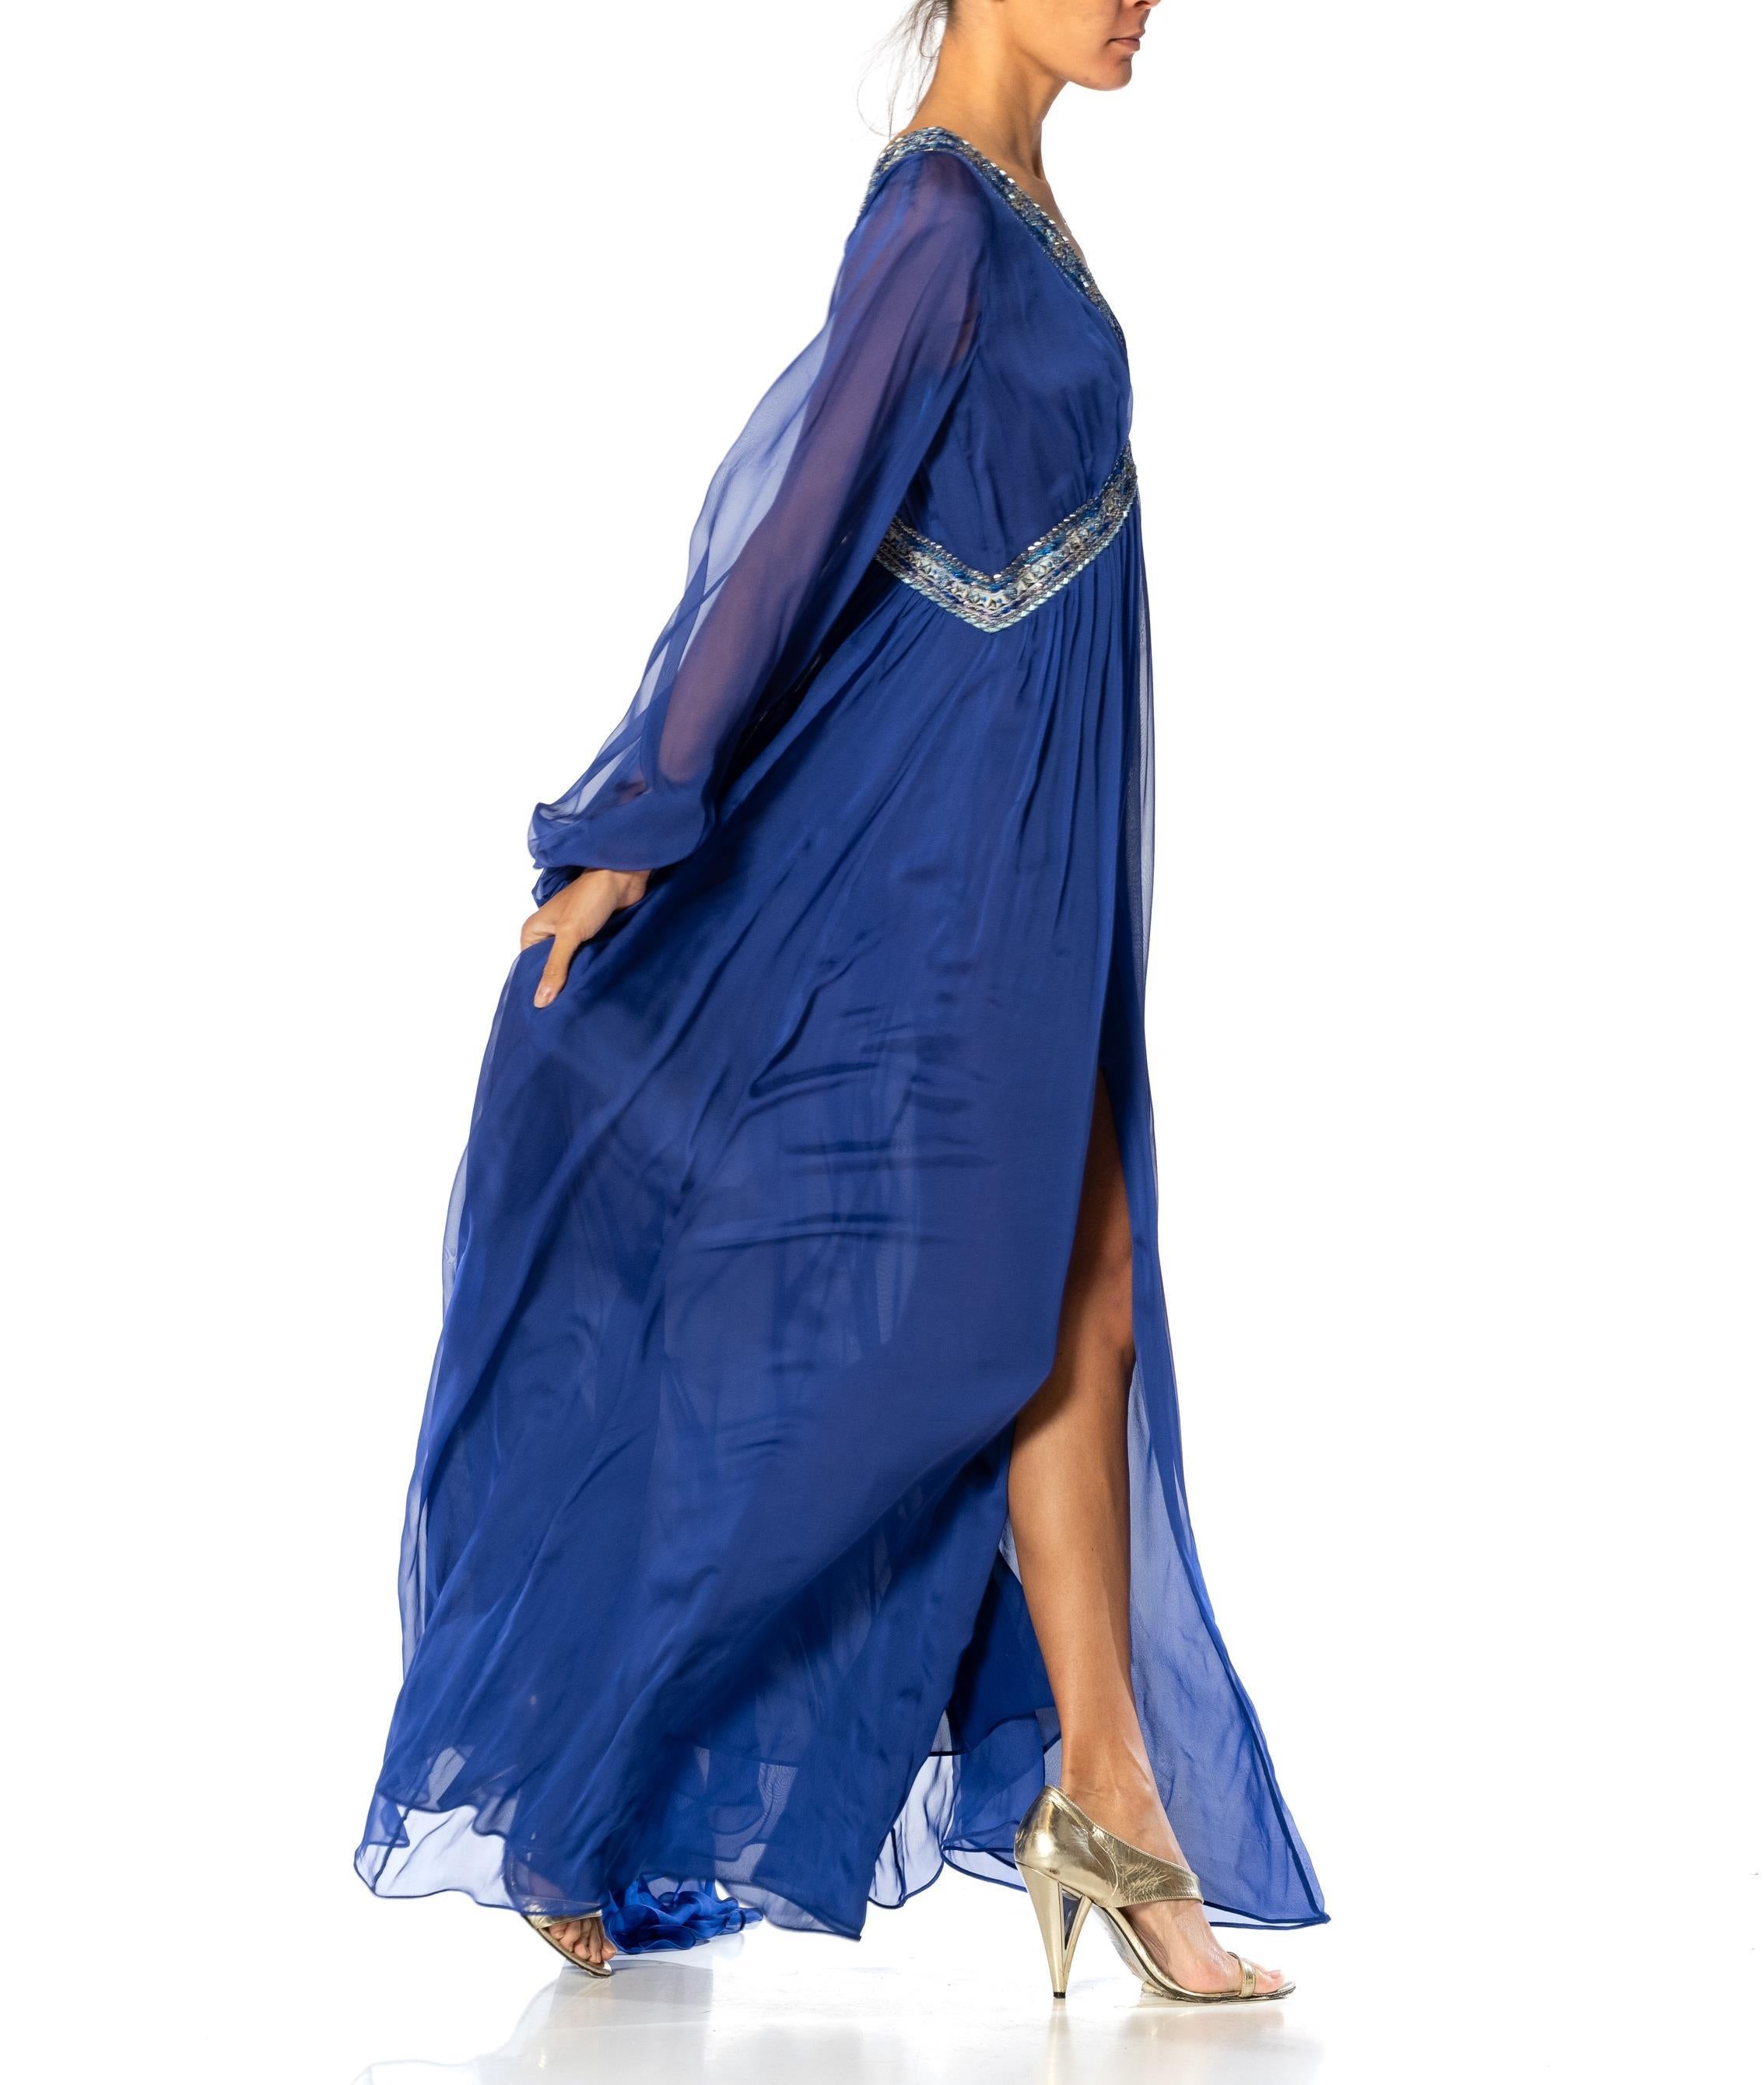 2000S EMILIO PUCCI Cobalt Blue Silk Chiffon Sleeved Gown With Beaded Print Deta In Excellent Condition For Sale In New York, NY